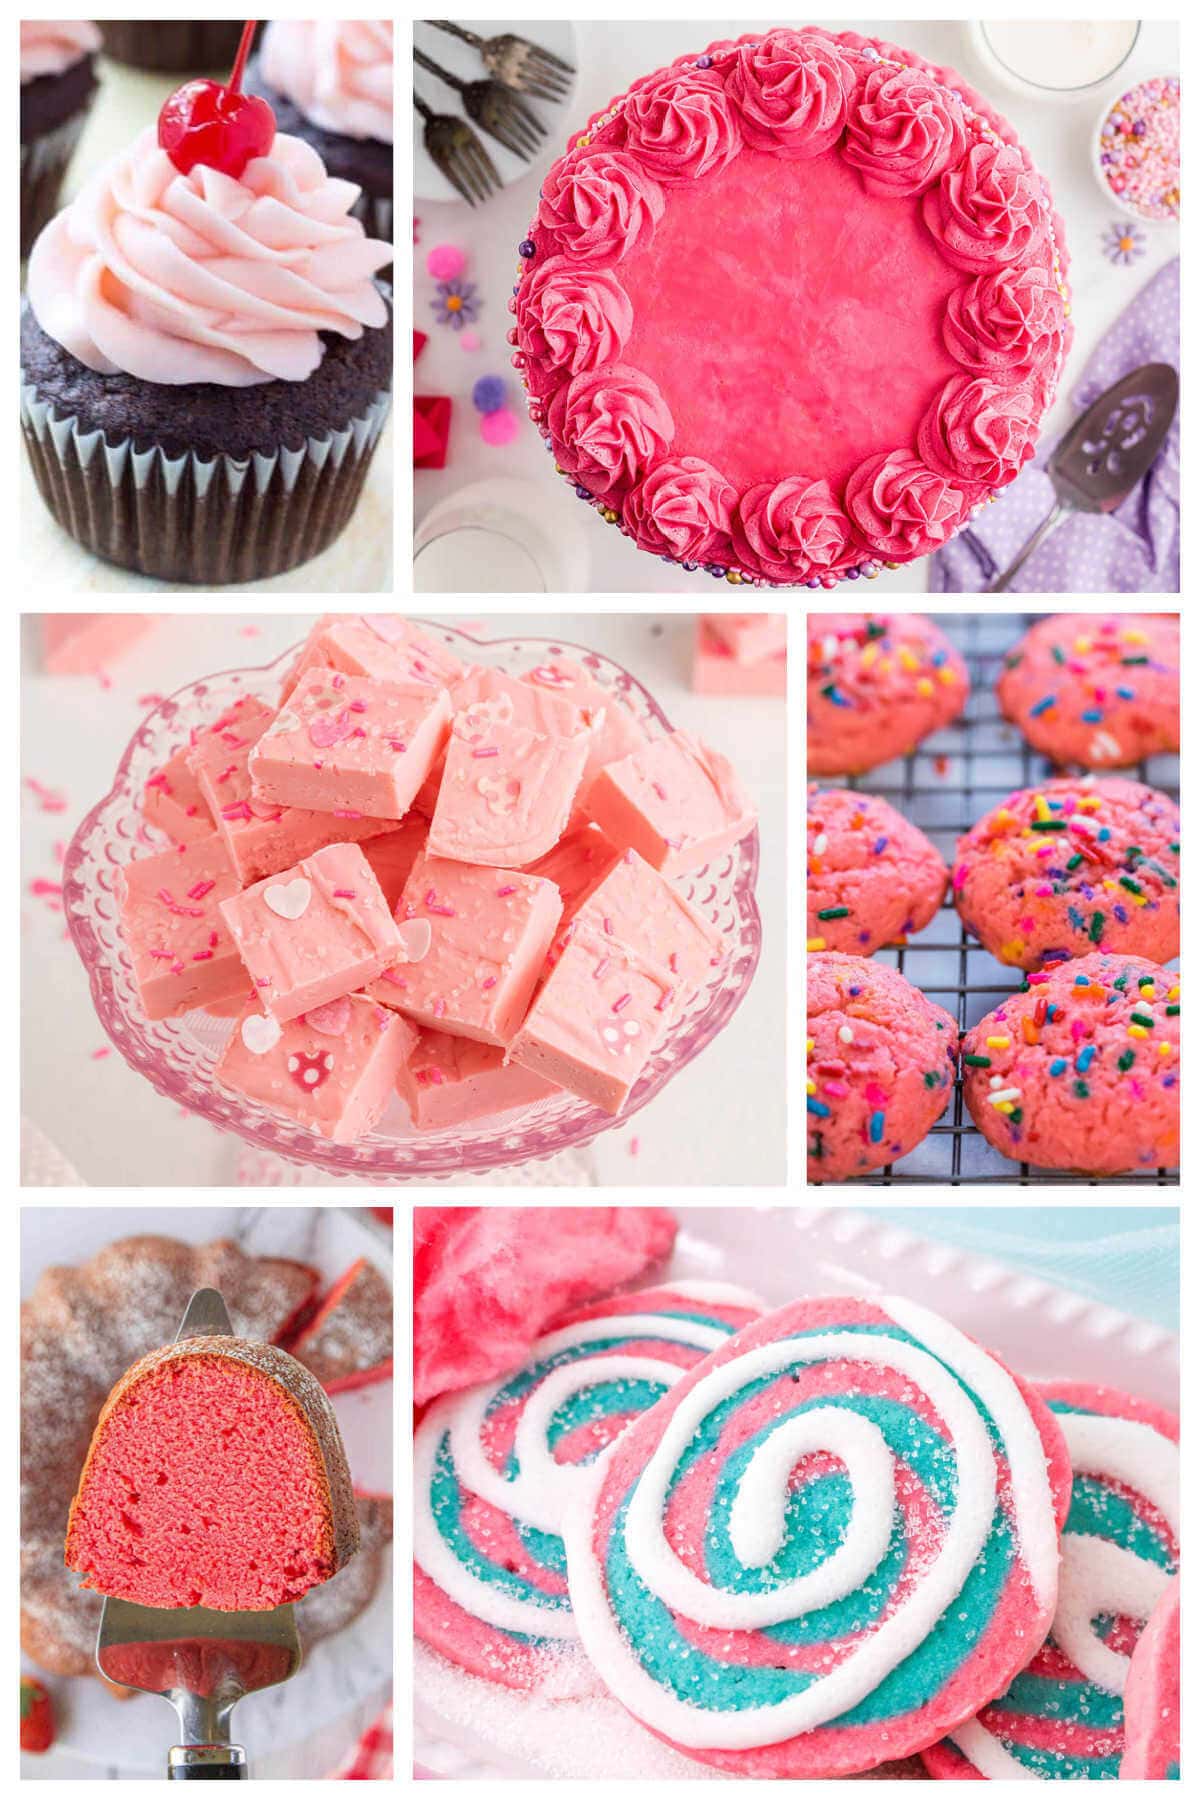 A collage of photos of pretty pink party food ideas with cupcakes, cookies and yummy pink cakes.